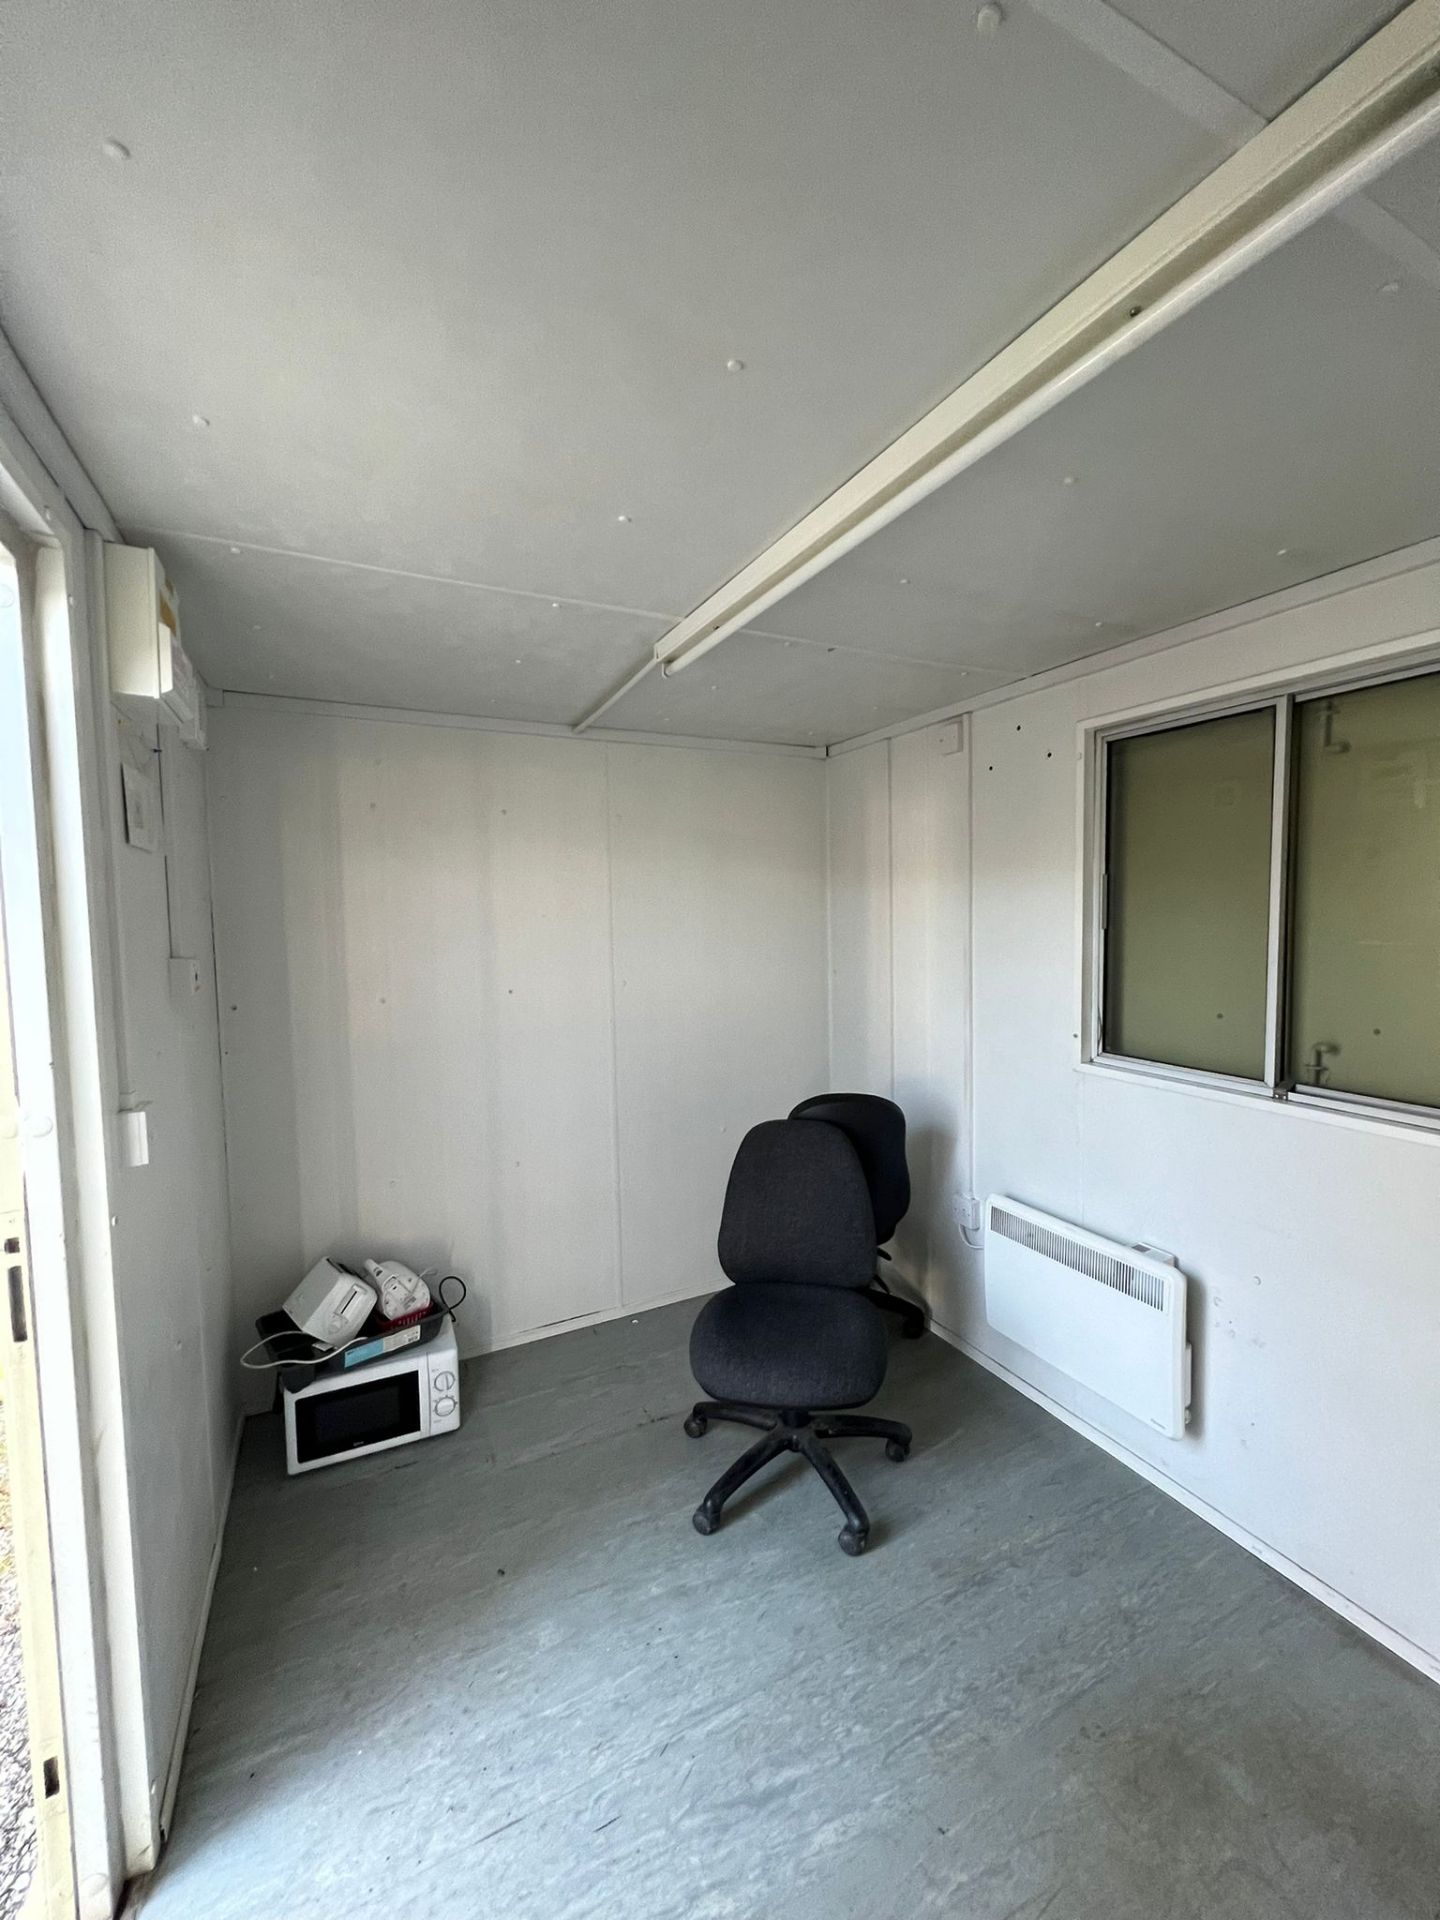 12ft site office cabin - Image 6 of 8